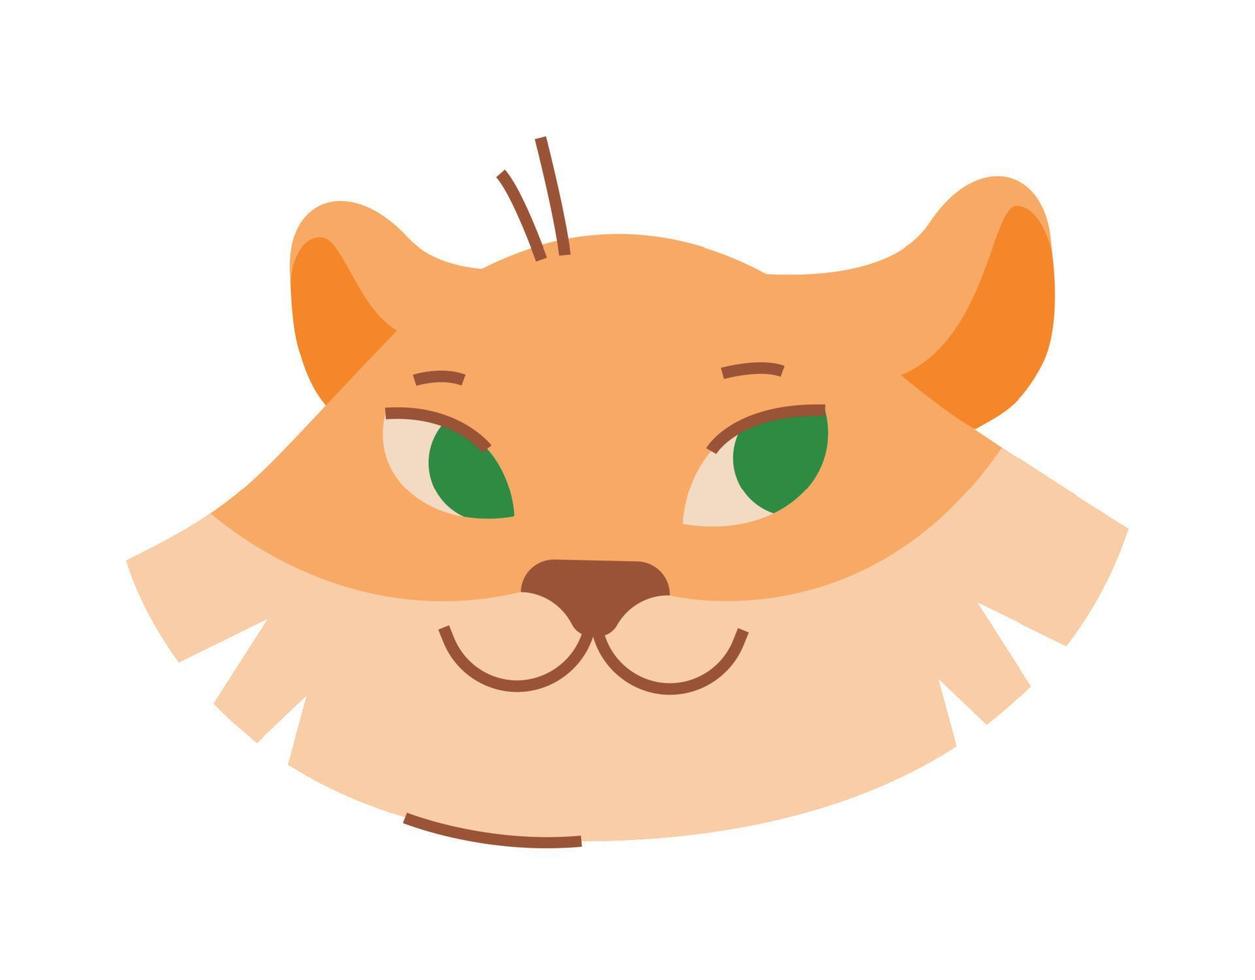 Satisfied face of a tiger. Vector image.